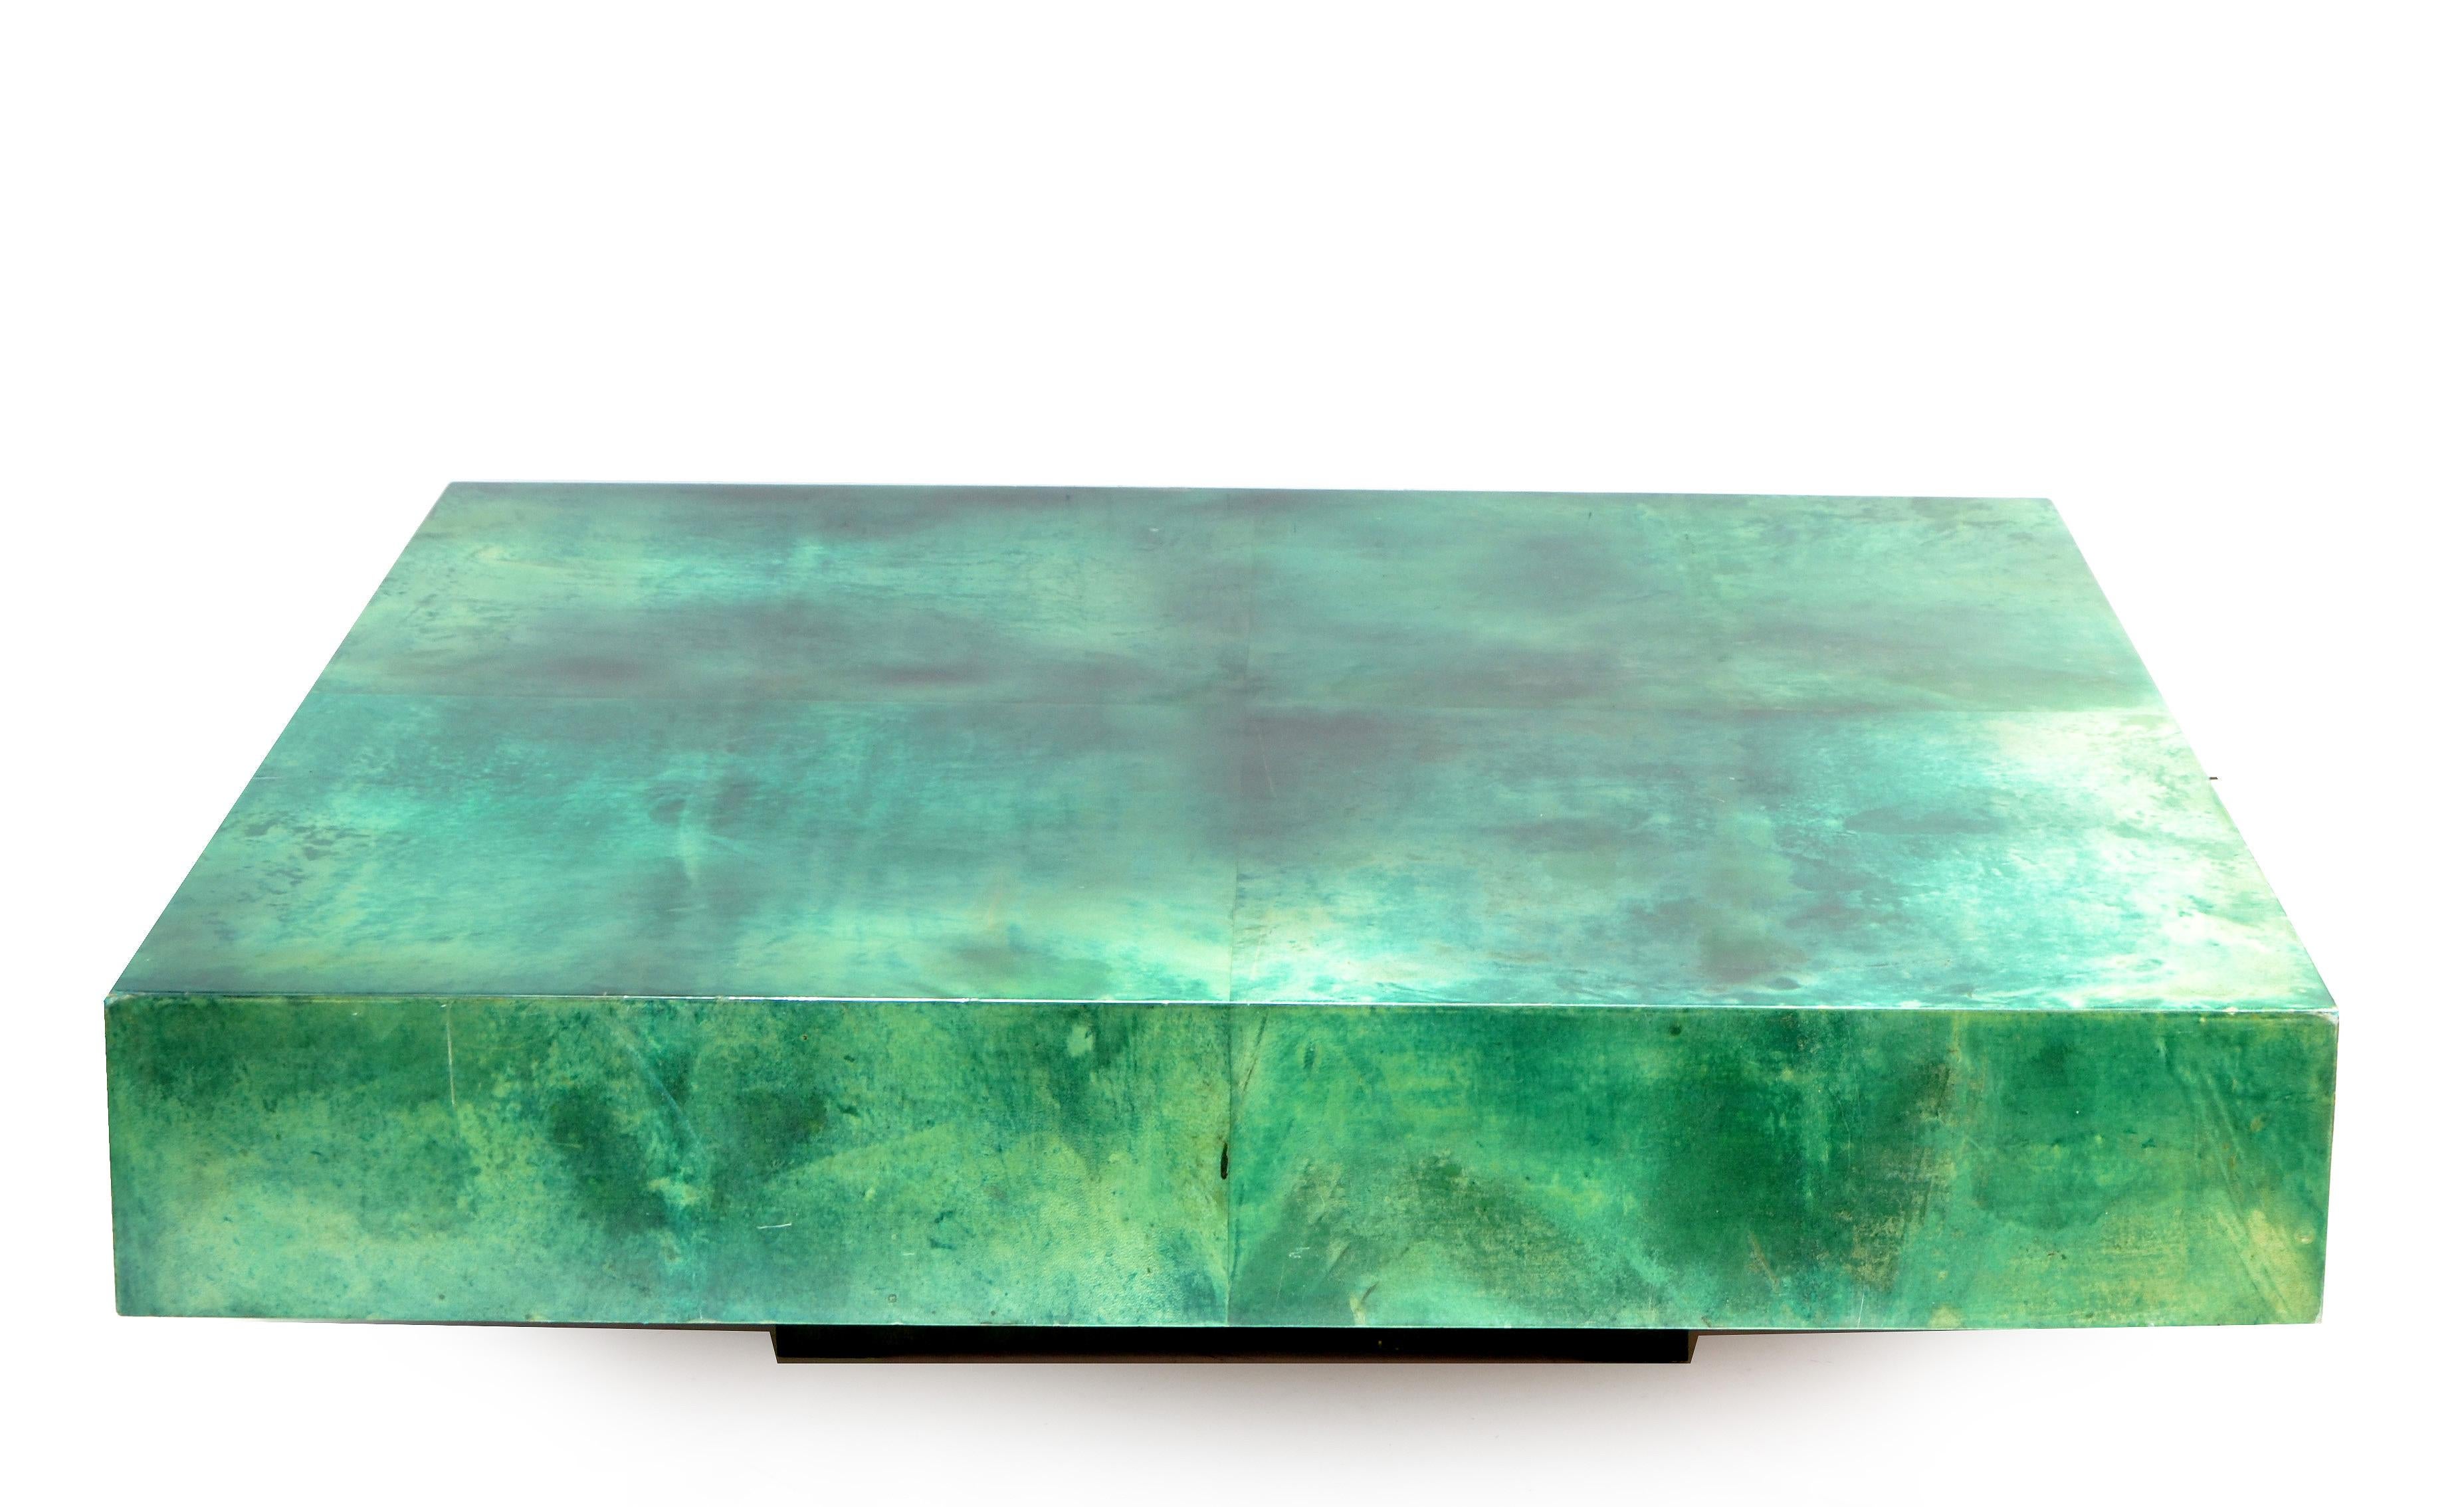 Huge Aldo Tura Coffee / Cocktail Table Emerald Green Lacquered Goatskin Top  6